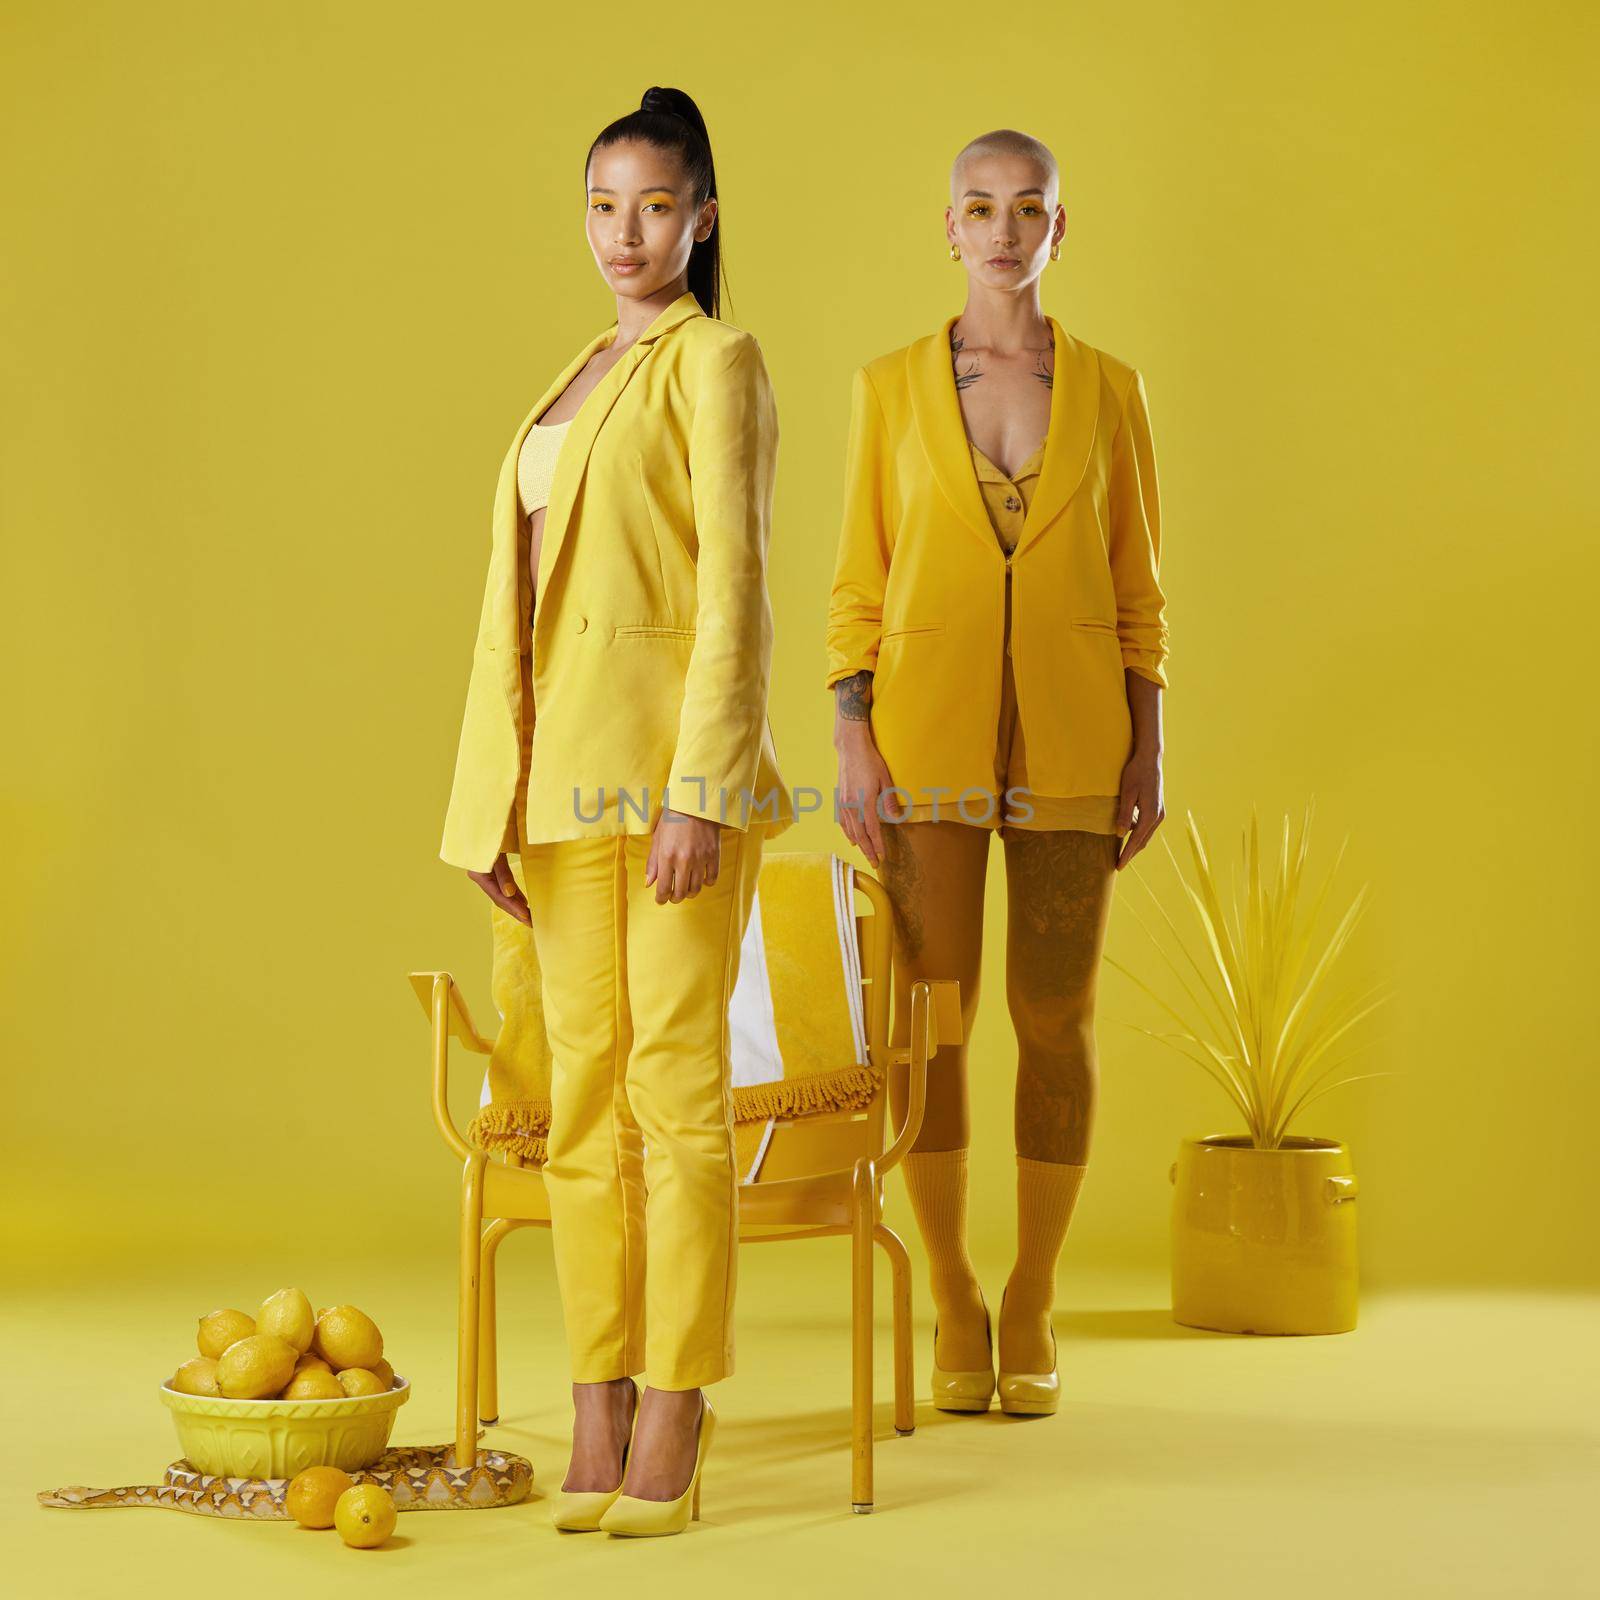 Everyone can pull off the yellow look, just not this good. Shot of two women dressed in stylish yellow clothes against a yellow background. by YuriArcurs